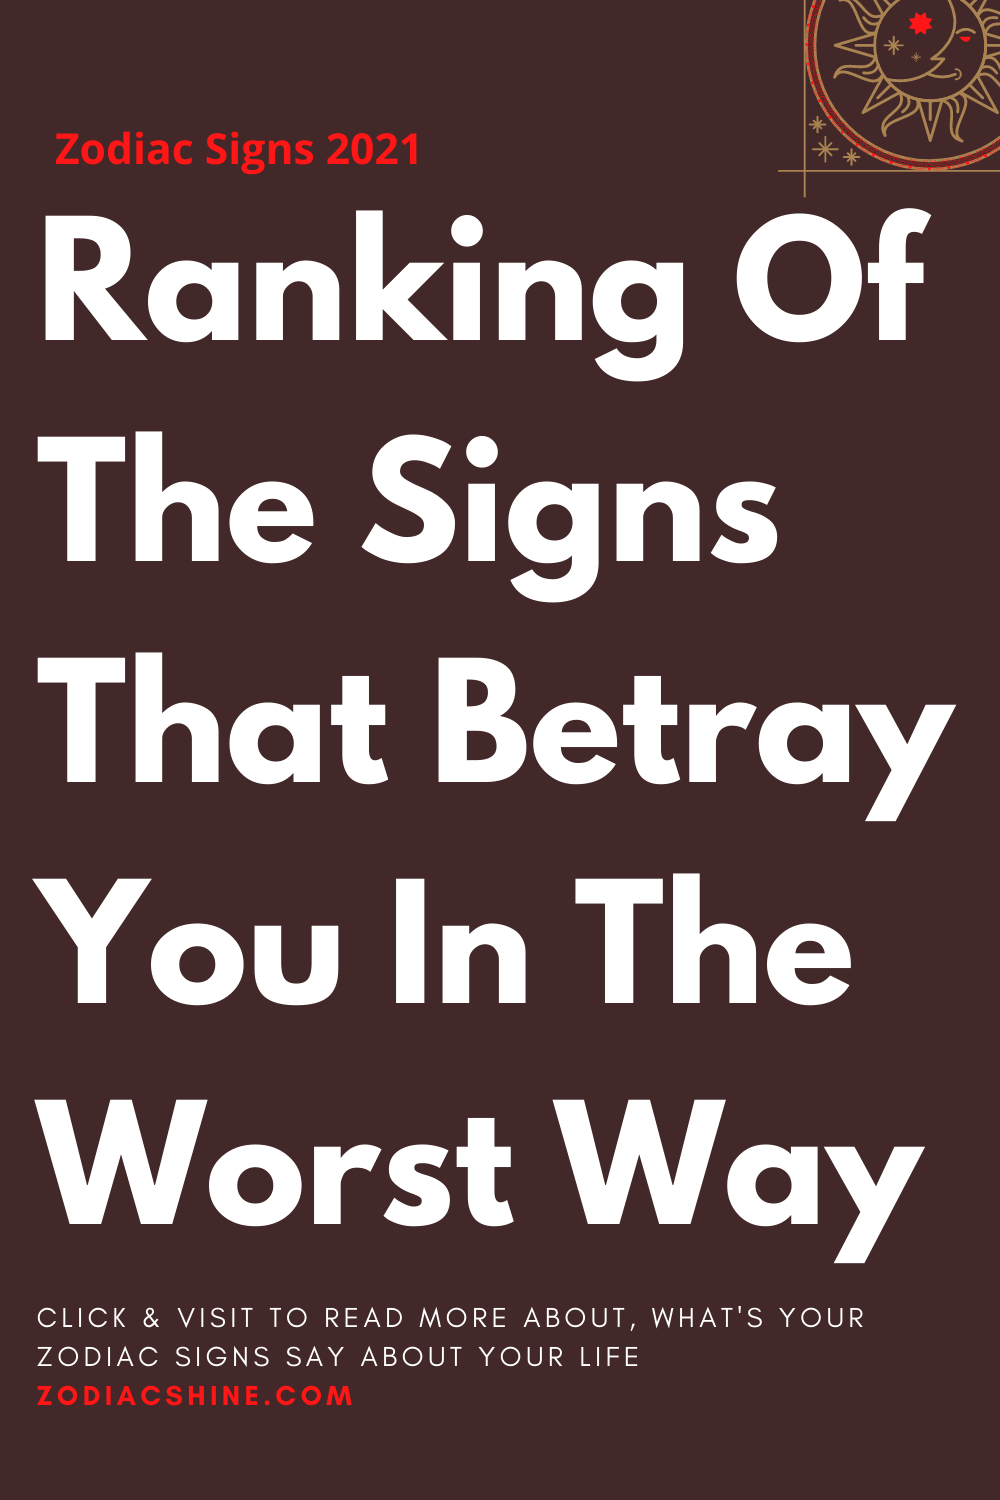 Ranking Of The Signs That Betray You In The Worst Way